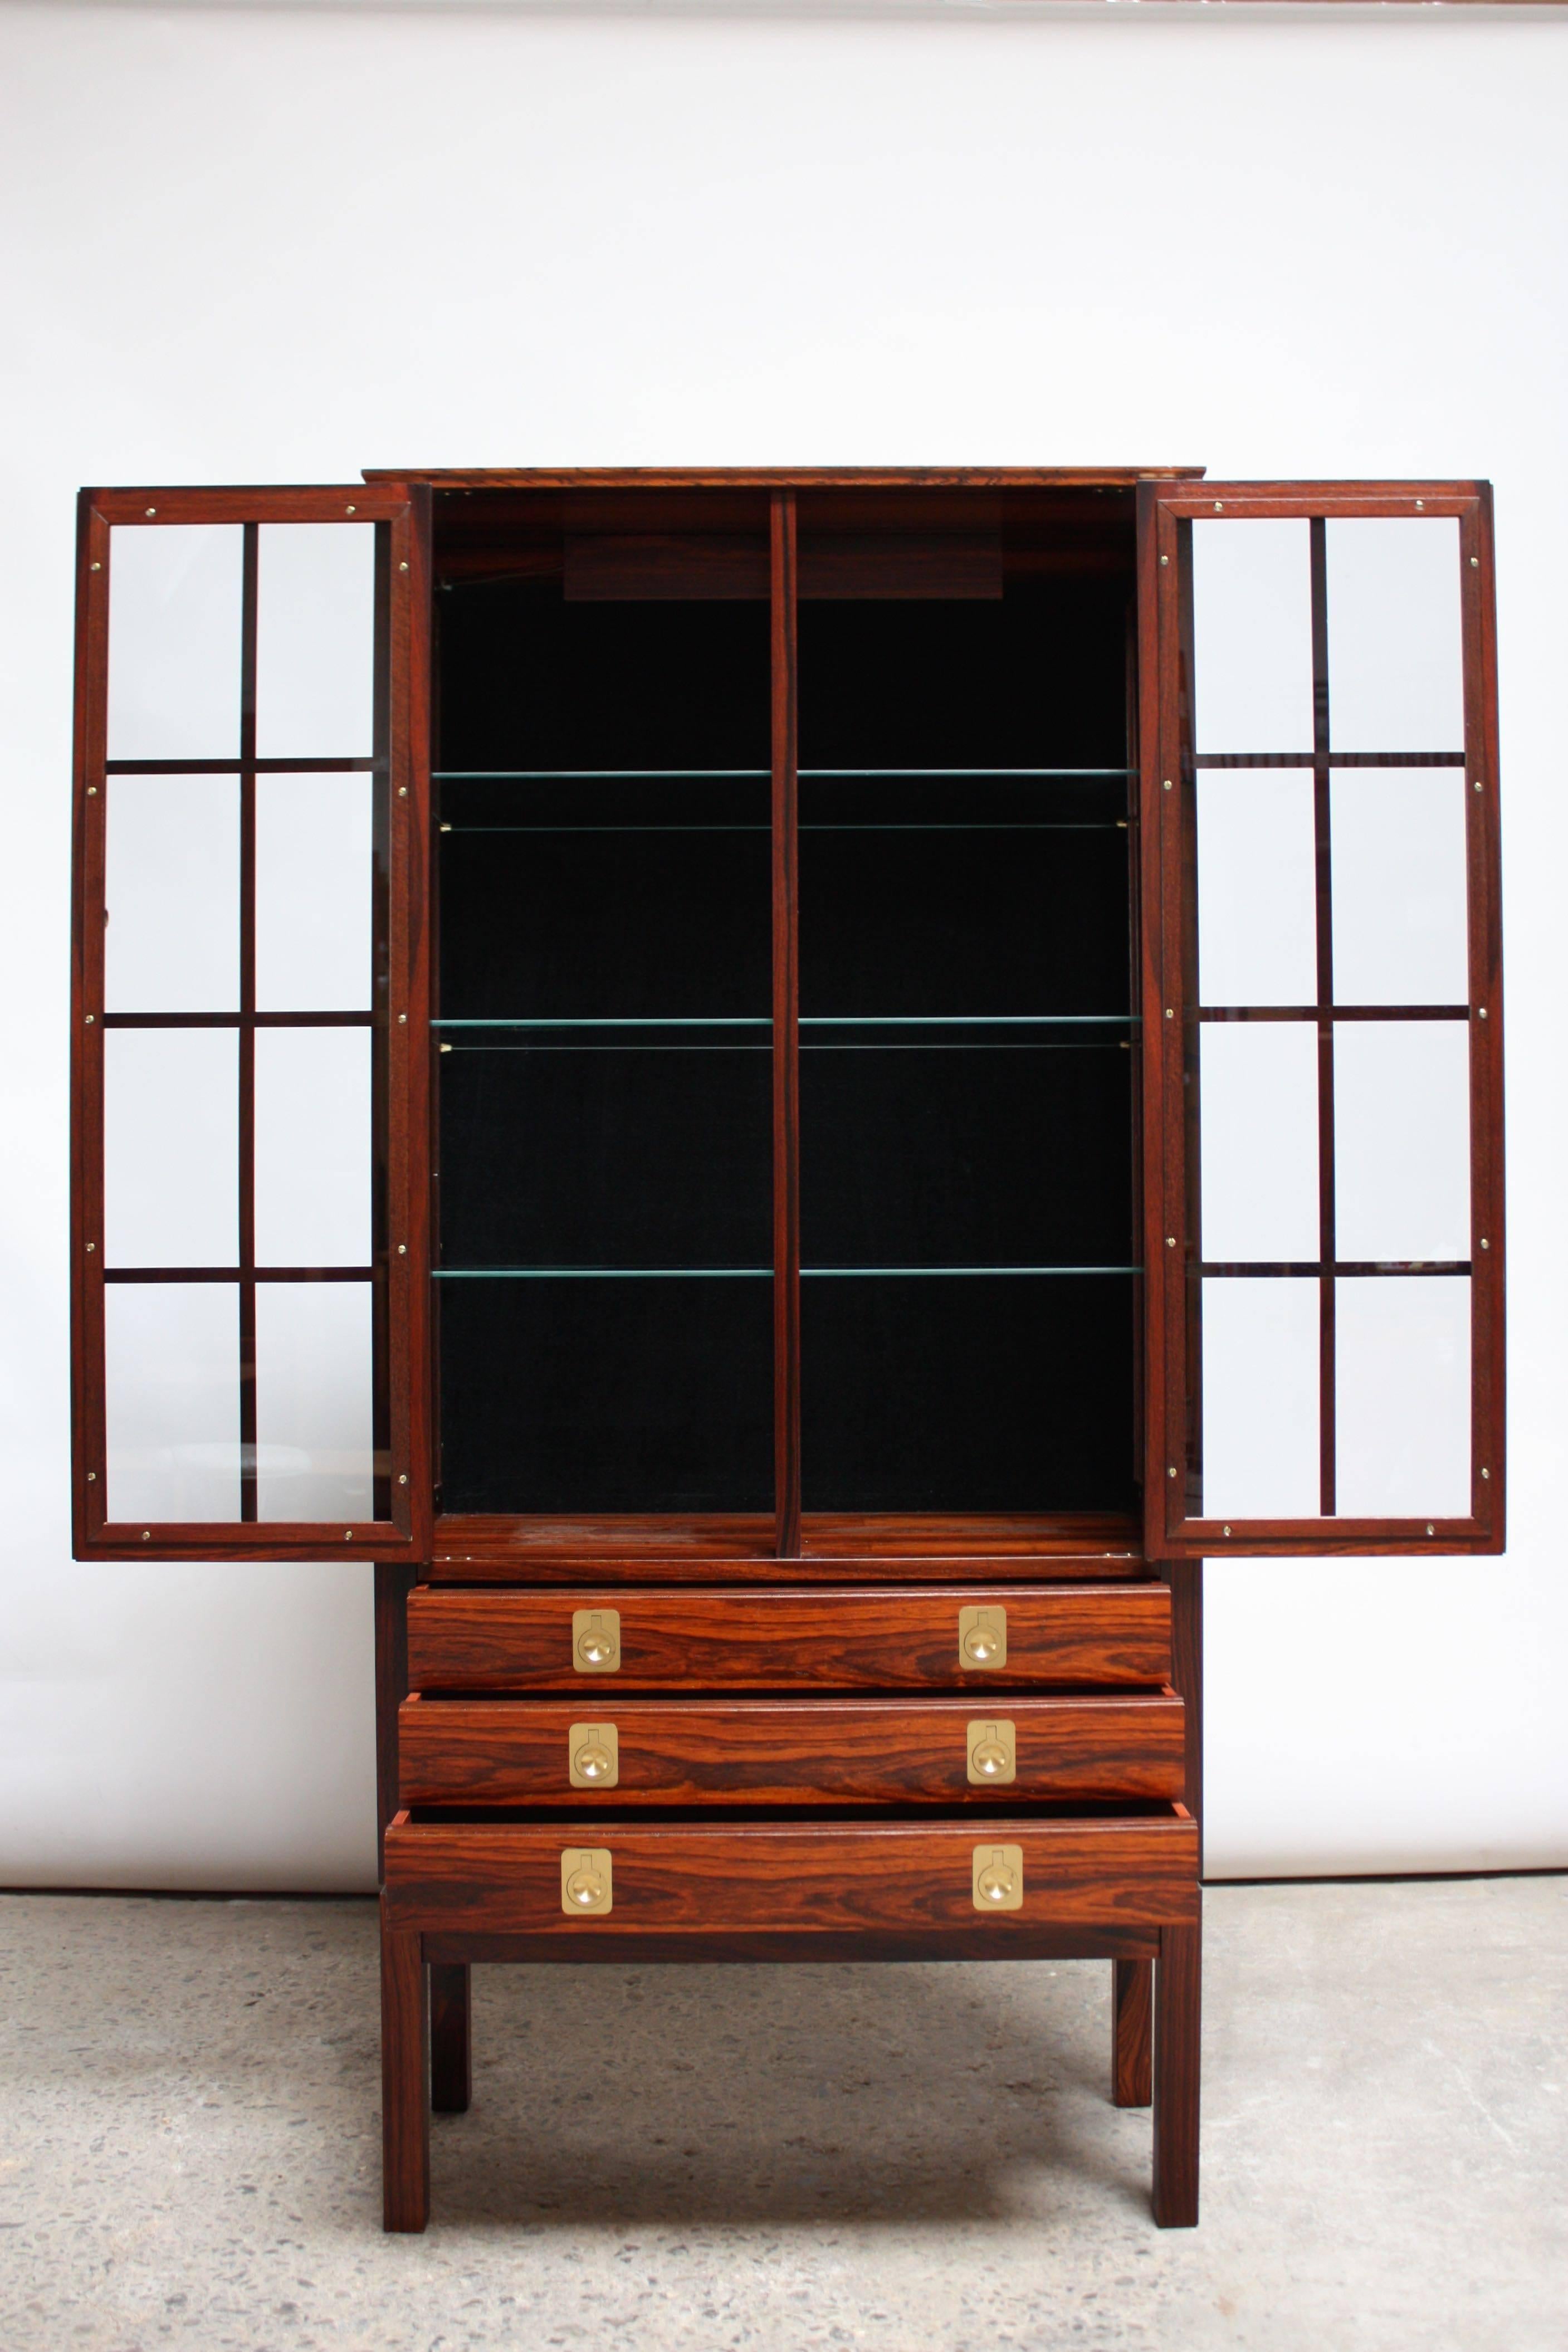 This spectacular curio cabinet was manufactured by Bruksbo of Mellemstrands, Norway in the 1960s and features a working interior light. The glass-fronted doors open to reveal three, non-adjustable glass shelves backed by black, felt lining. The